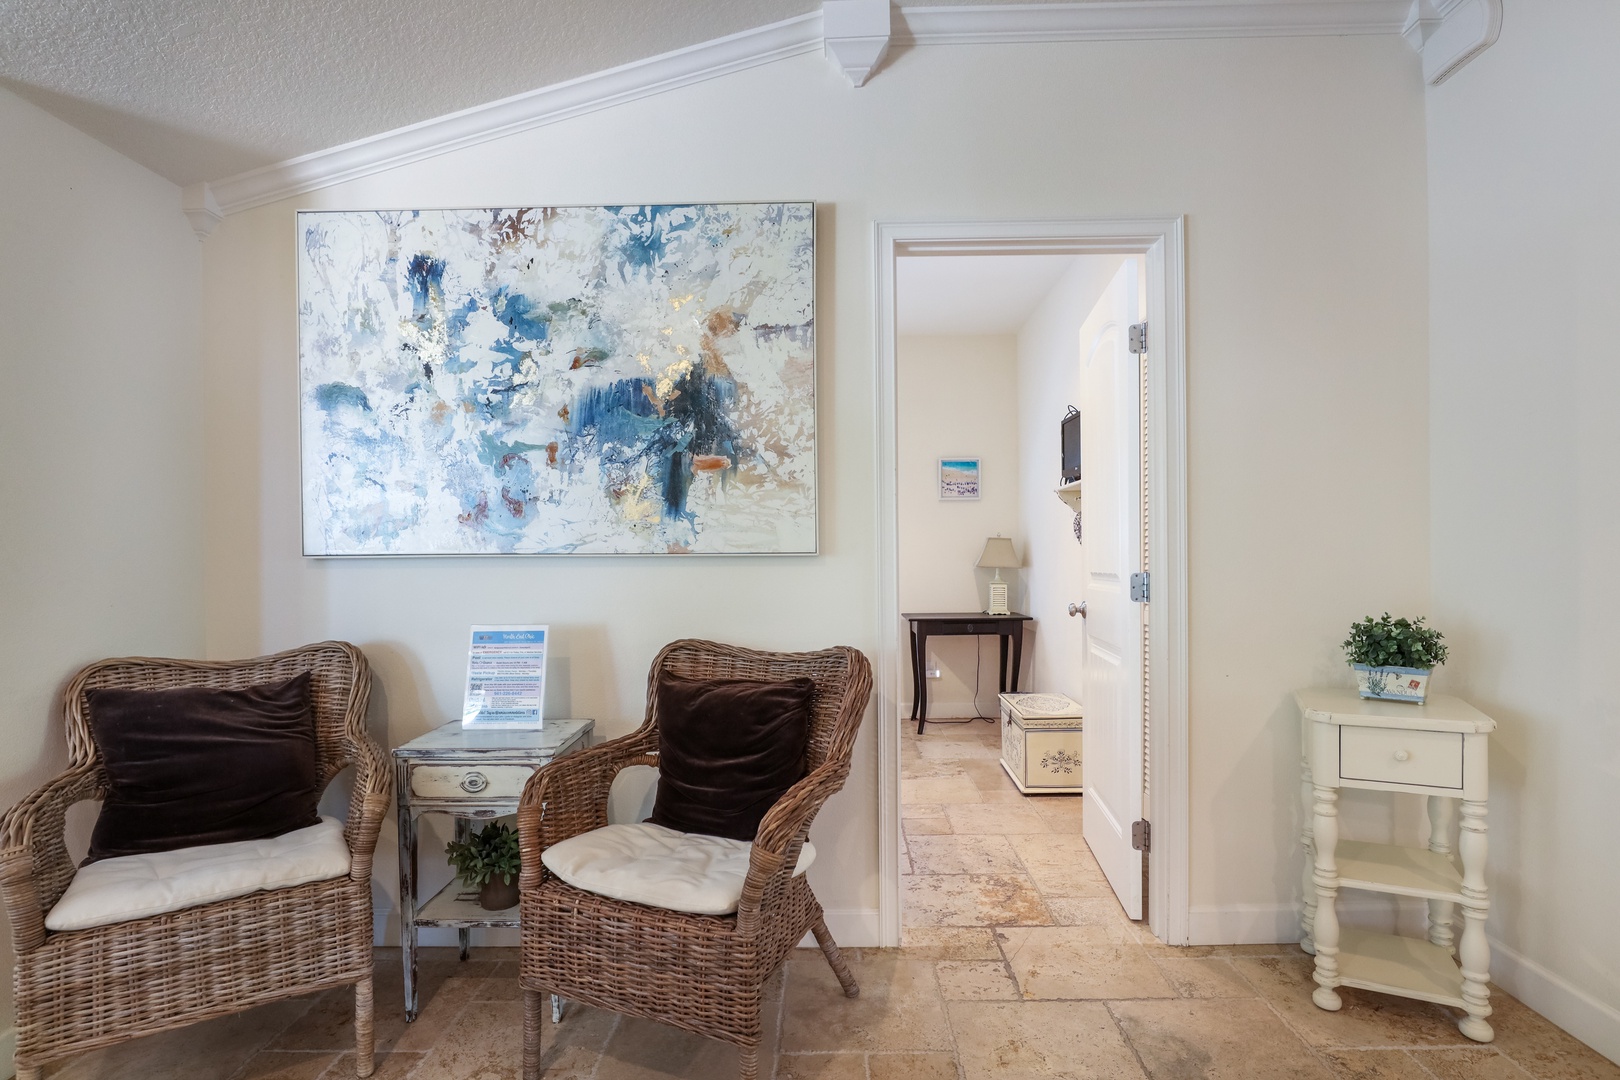 North End Chic - Anna Maria Accommodations